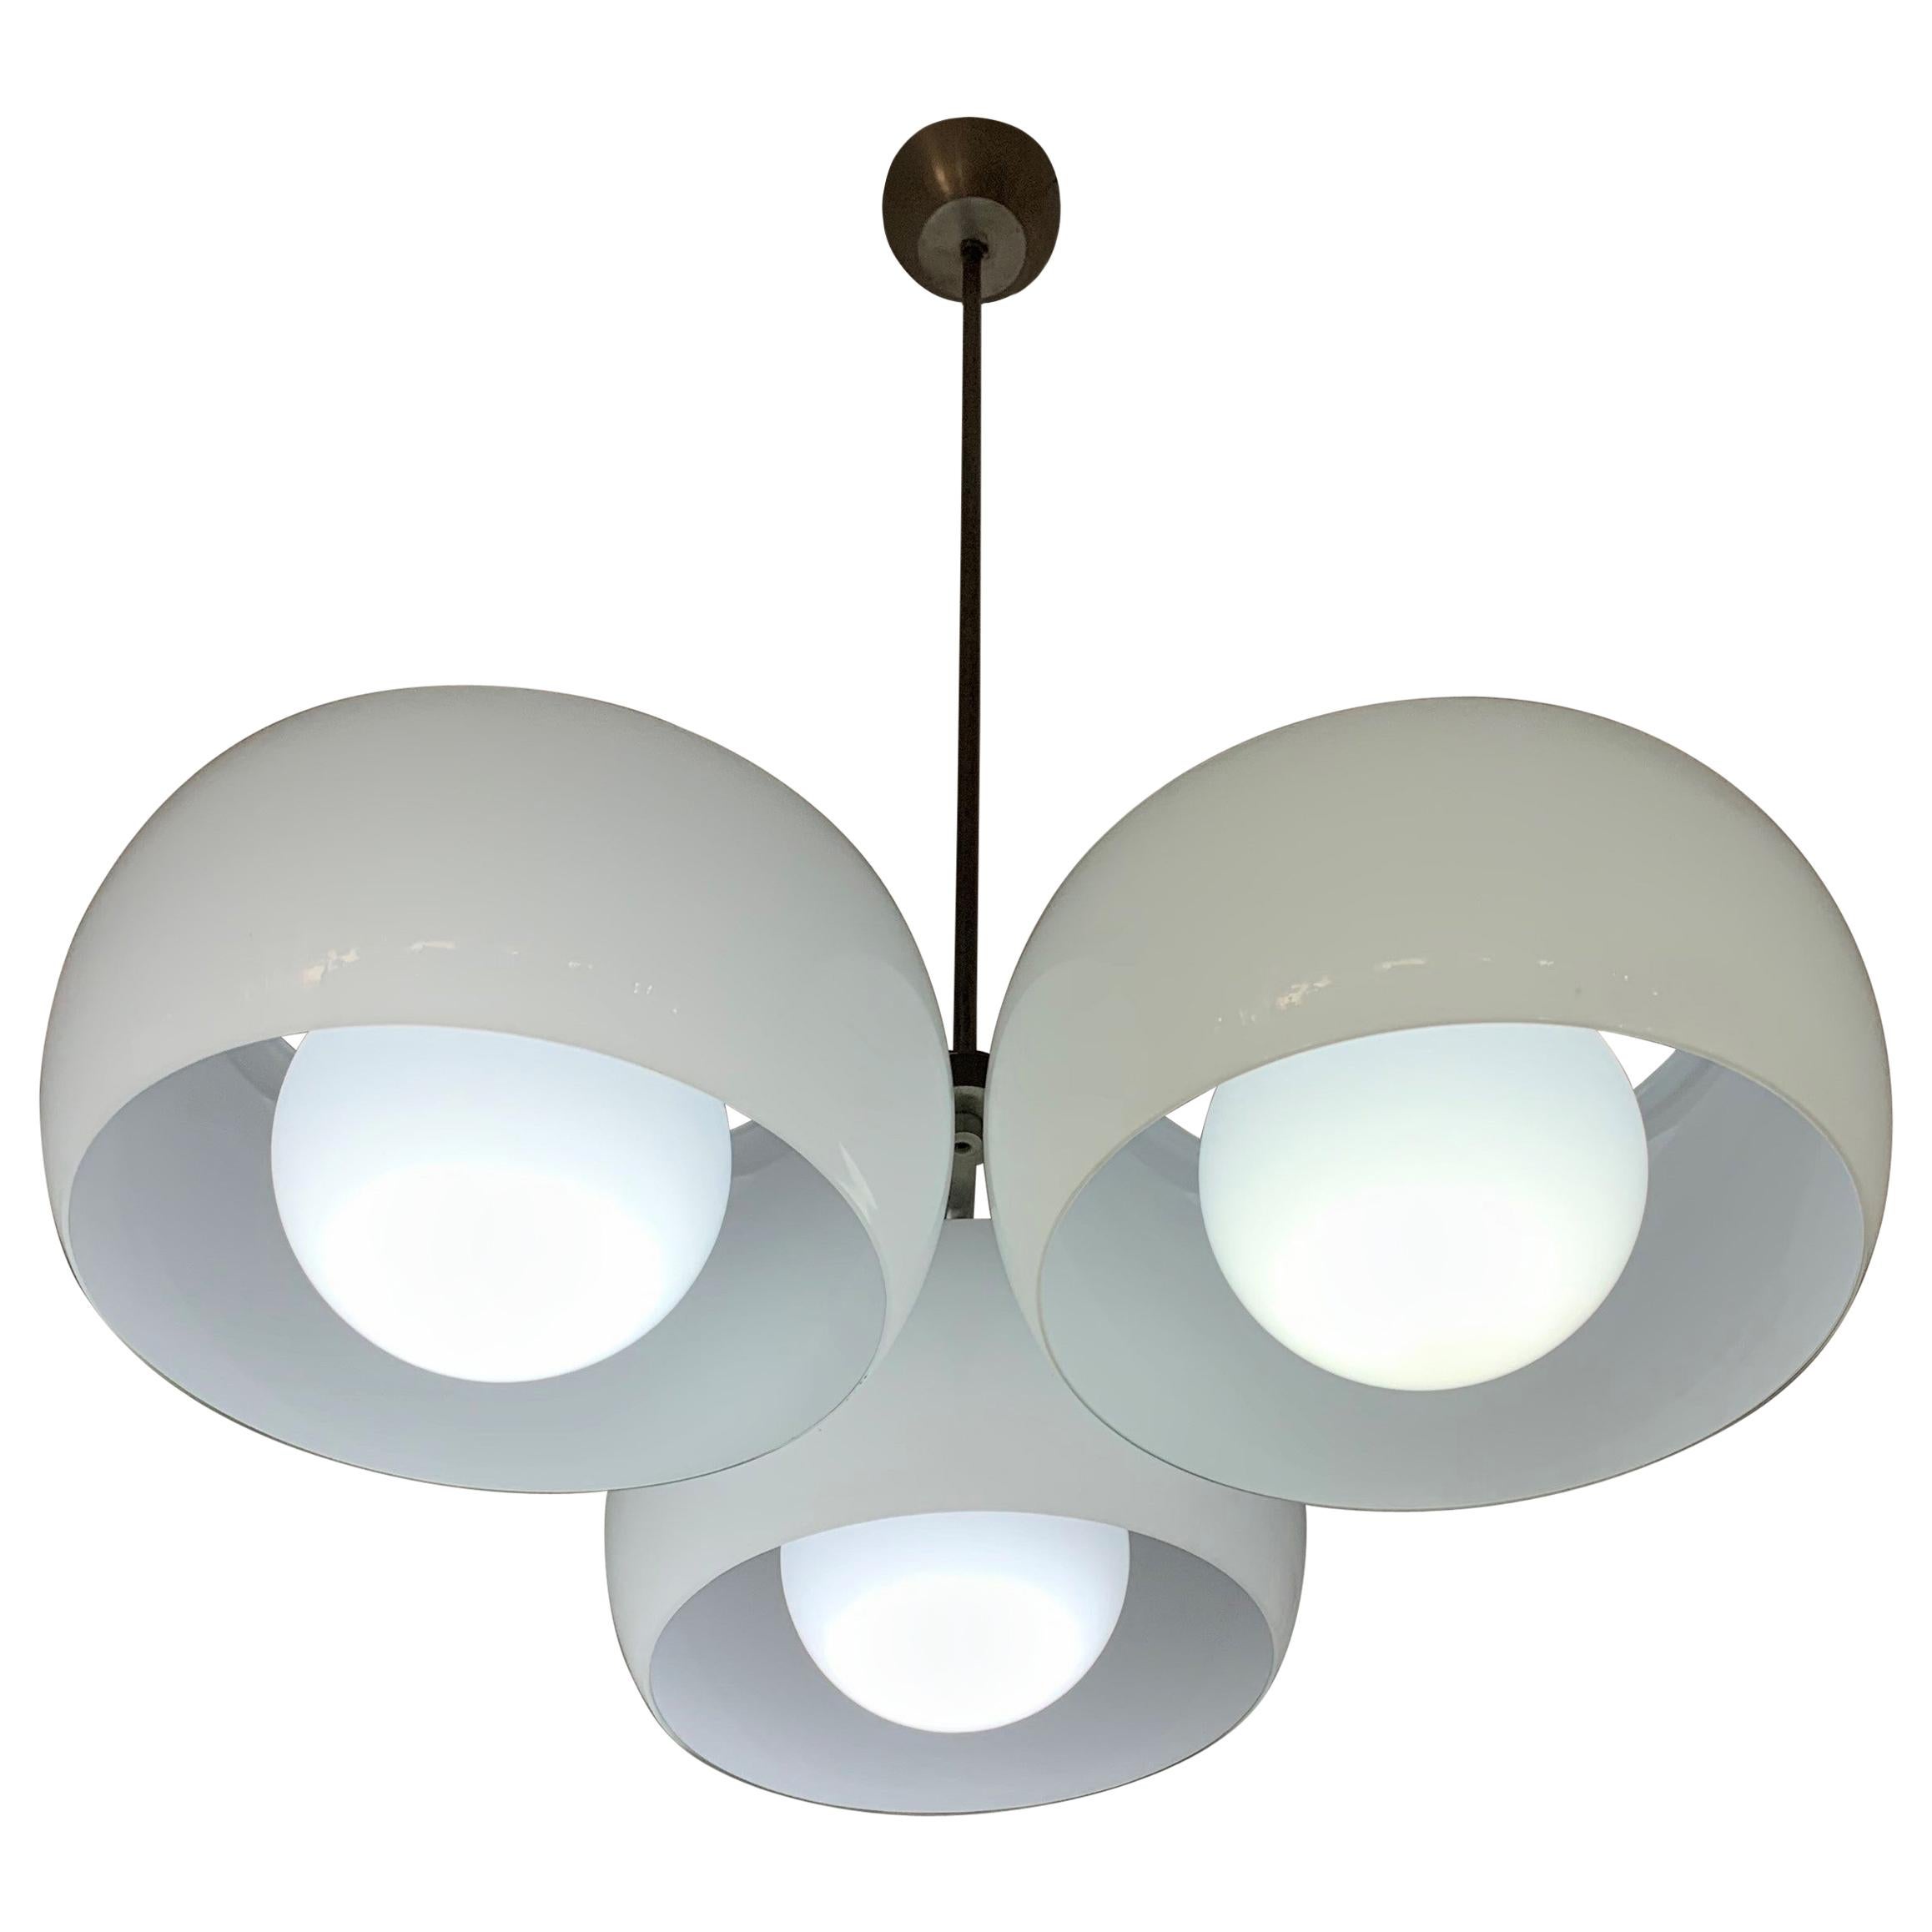 Two Mid-Century Modern "TriClinio" Chandelier by Vico Magistretti for Artemide